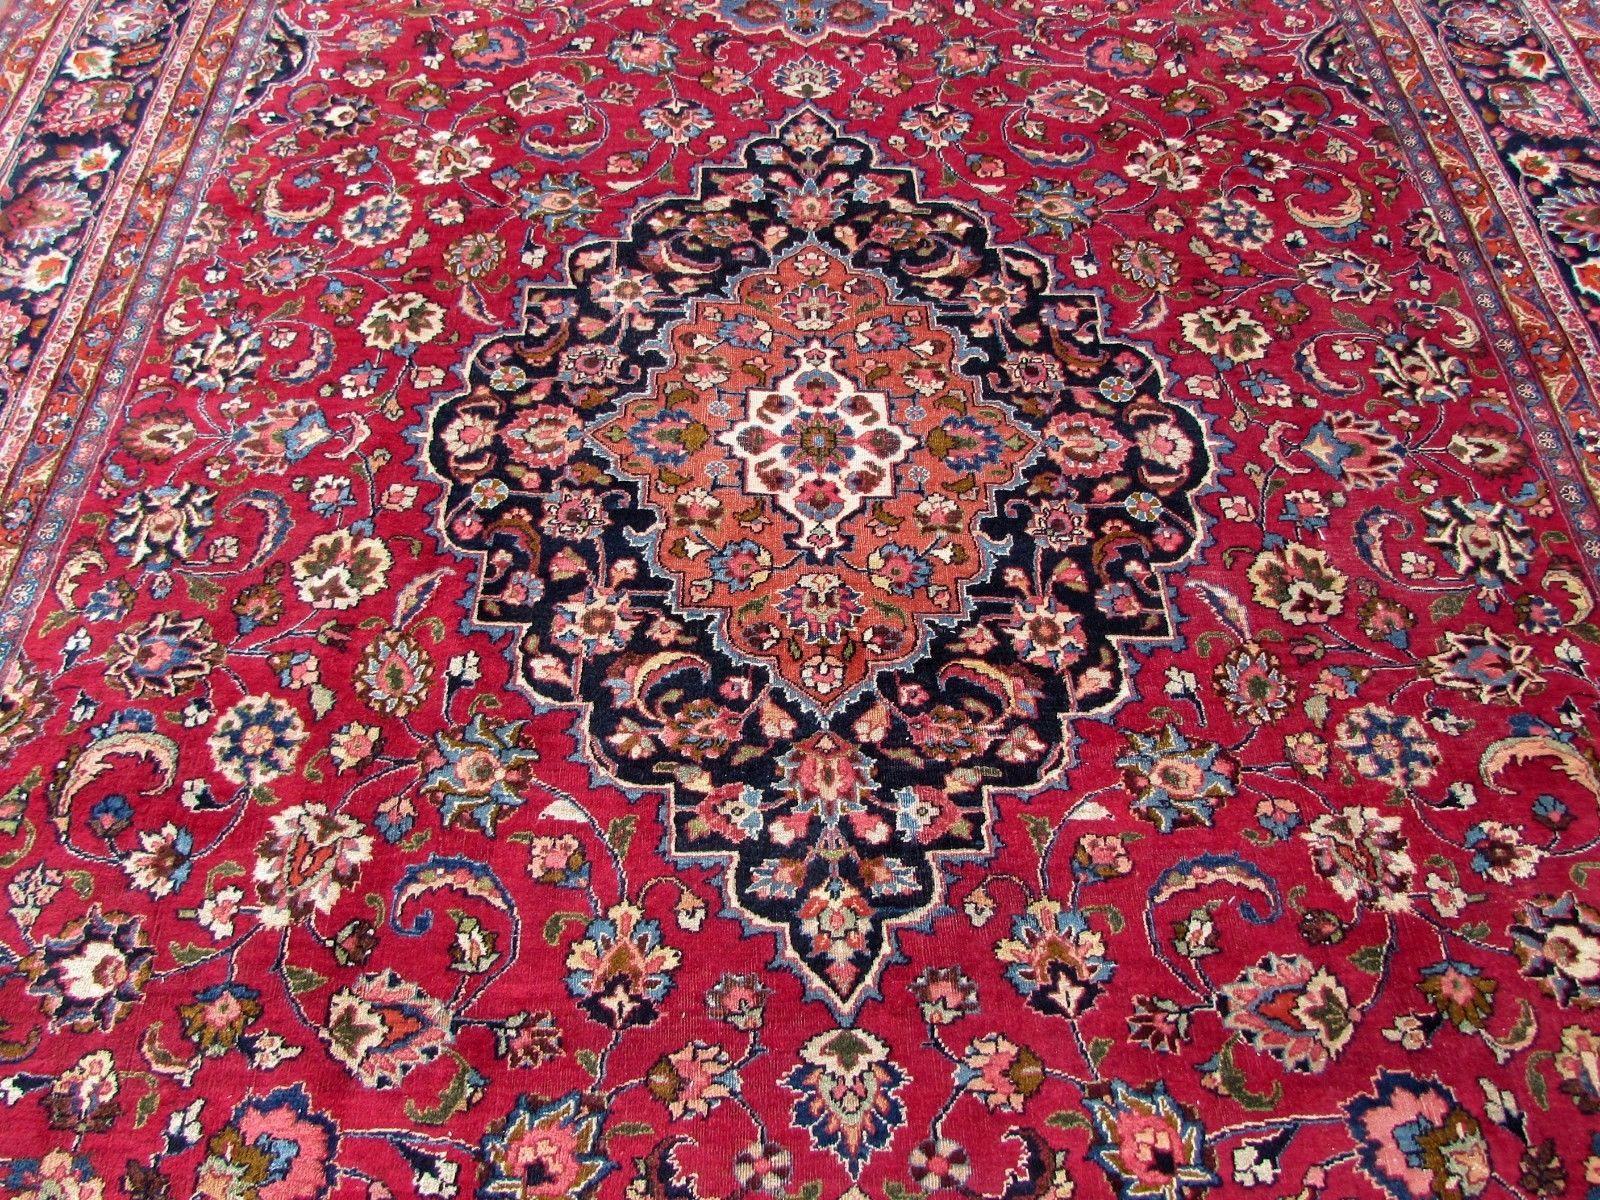 Handmade vintage Kashan rug in traditional design. The rug has been made in the end of the 20th century, it is in original good condition.

- Condition: original good,

- circa: 1970s,

- Size: 9.8' x 16' (289cm x 479cm),

- Material: